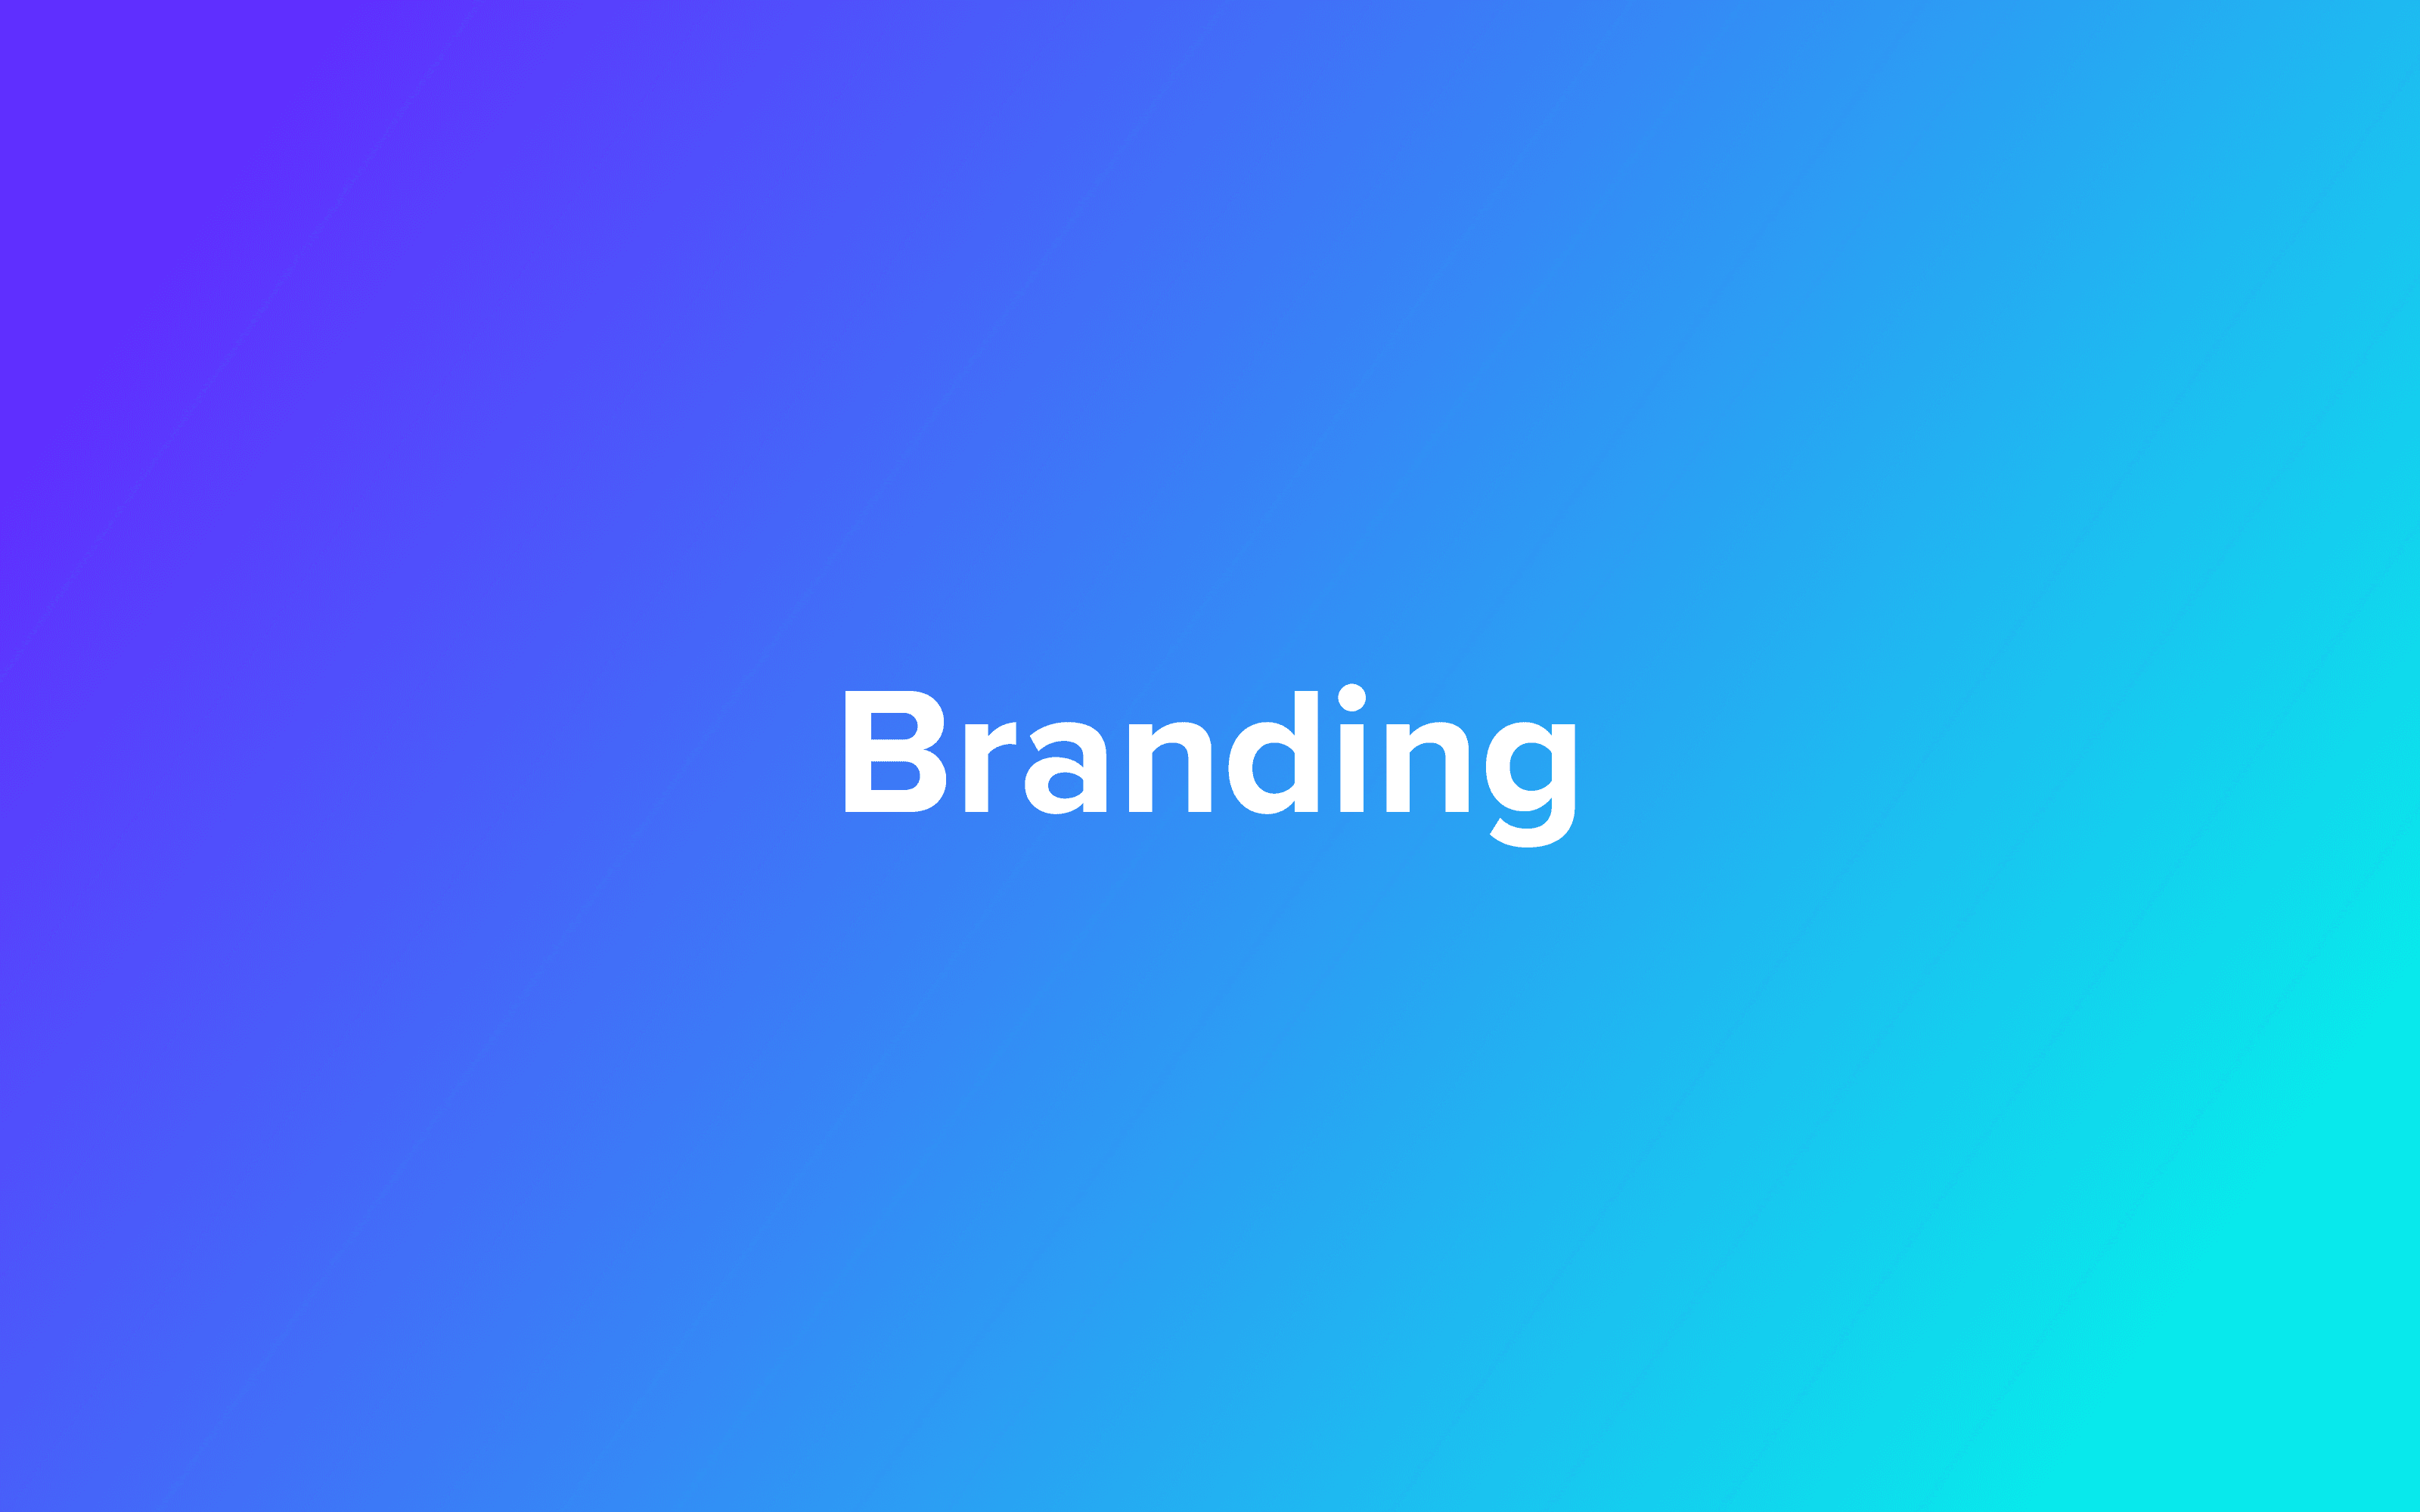 Purple to cyan gradient on the background. Big white letters read “Branding”